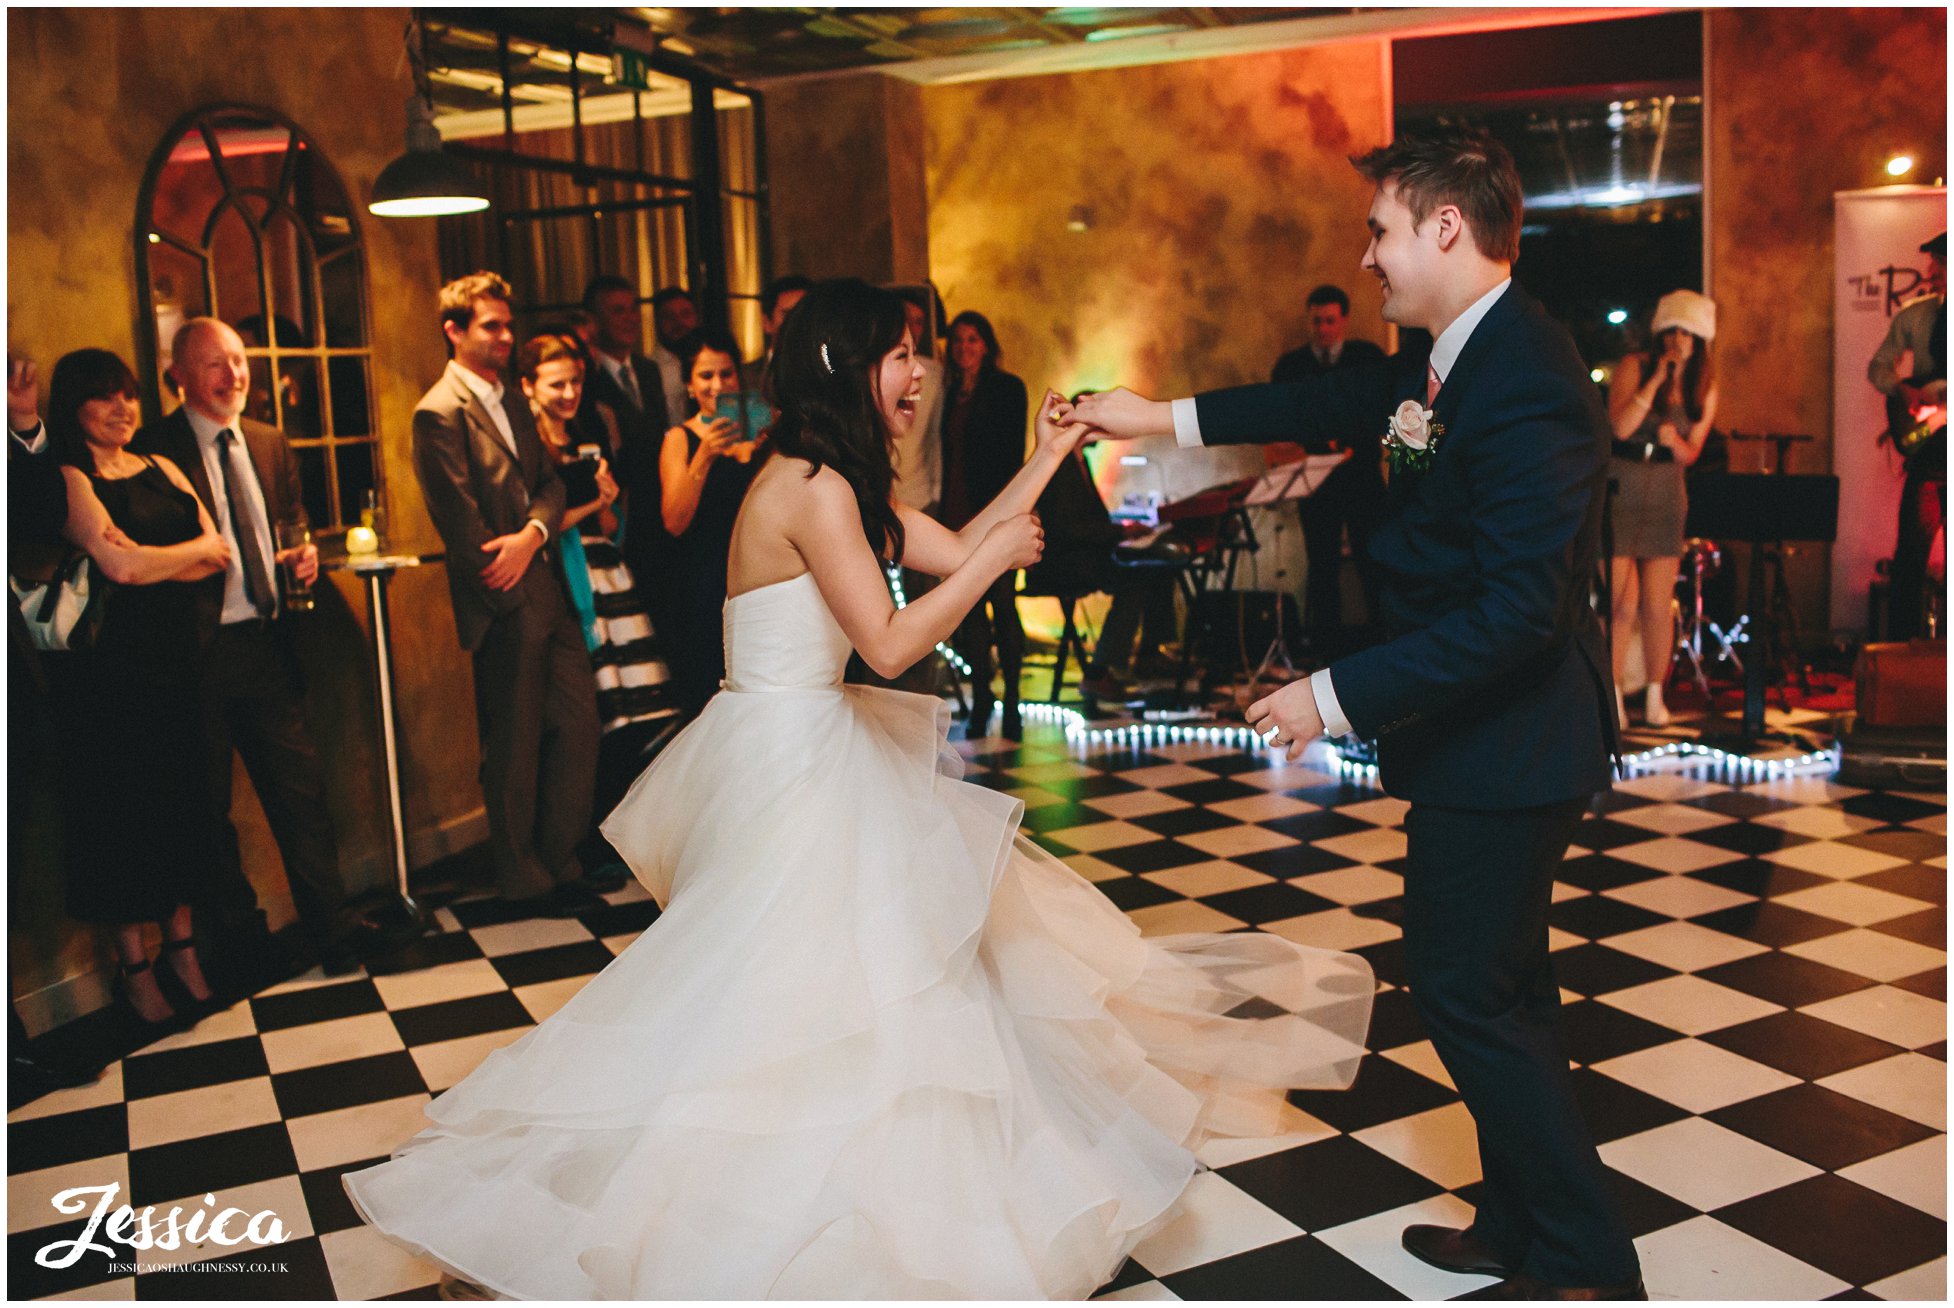 newly wed's dancing during their wedding reception in manchester